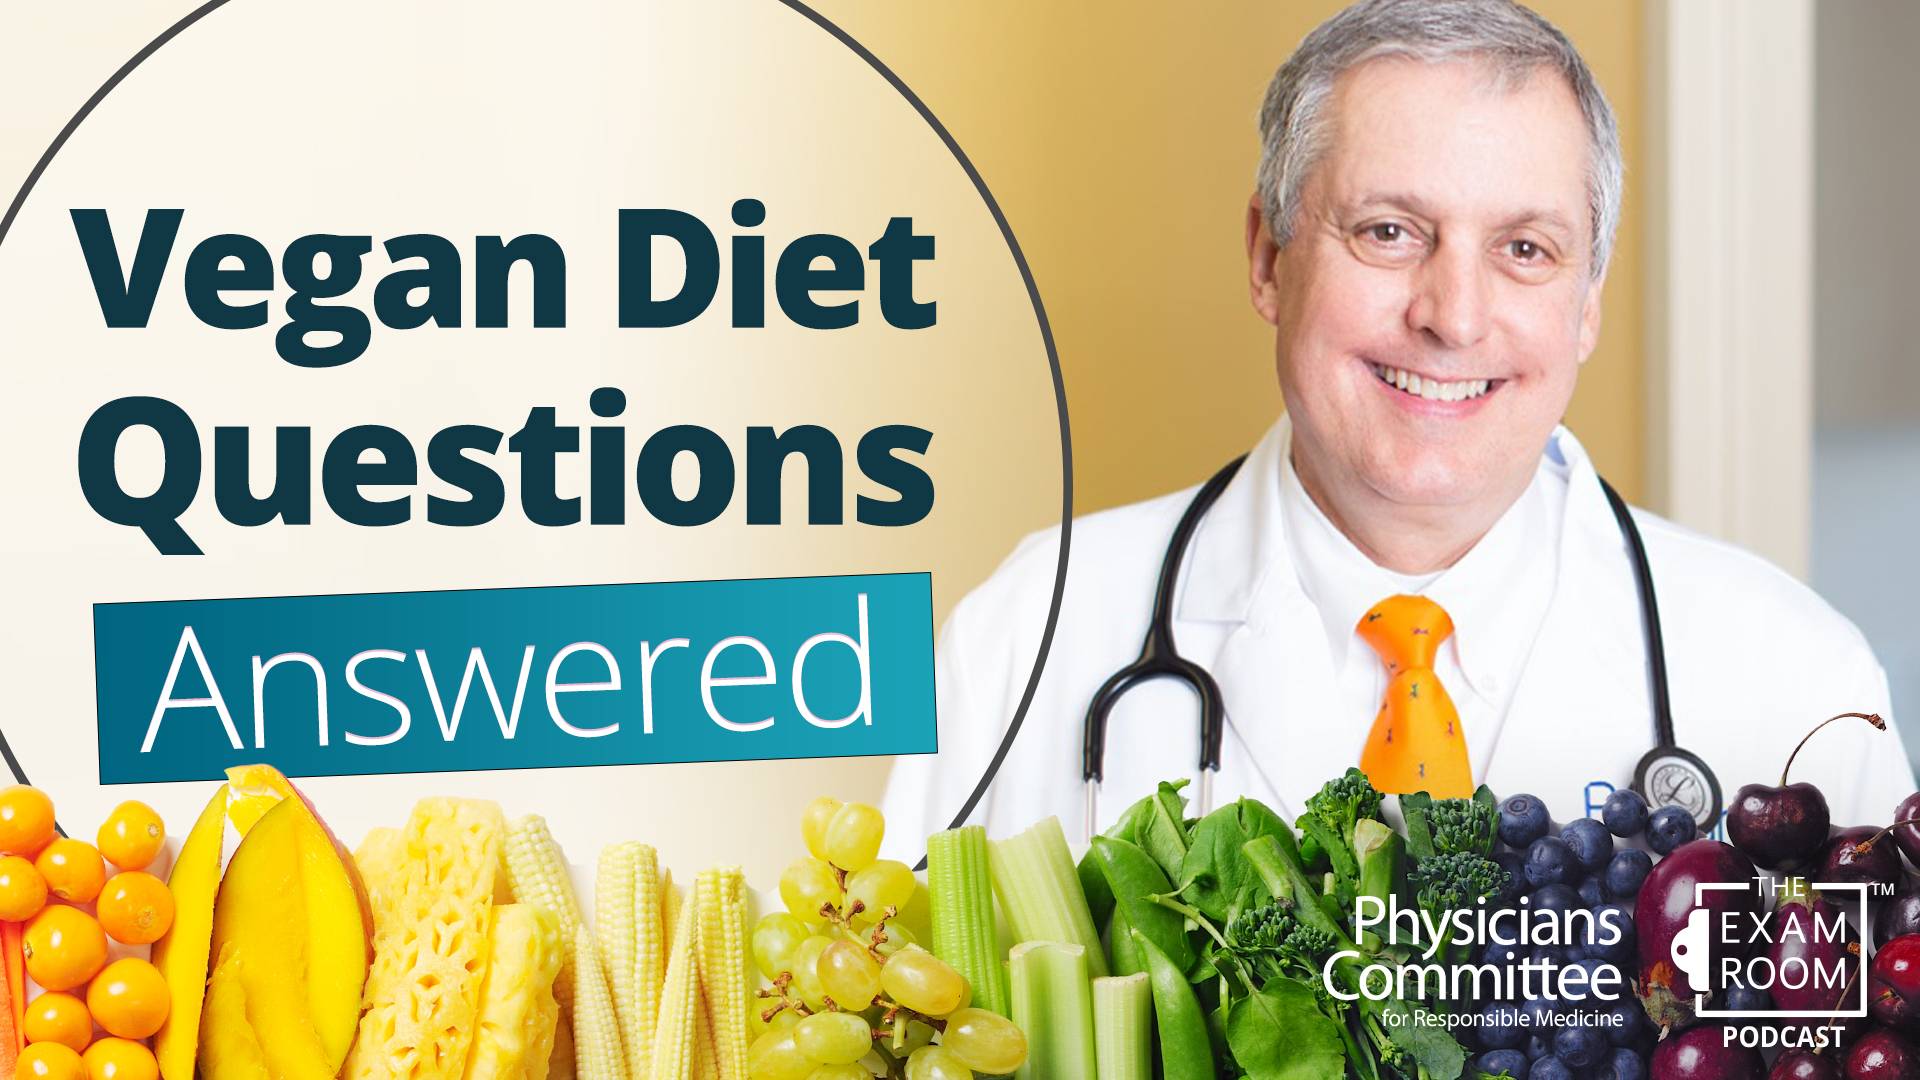 Vegan Diet Questions Answered